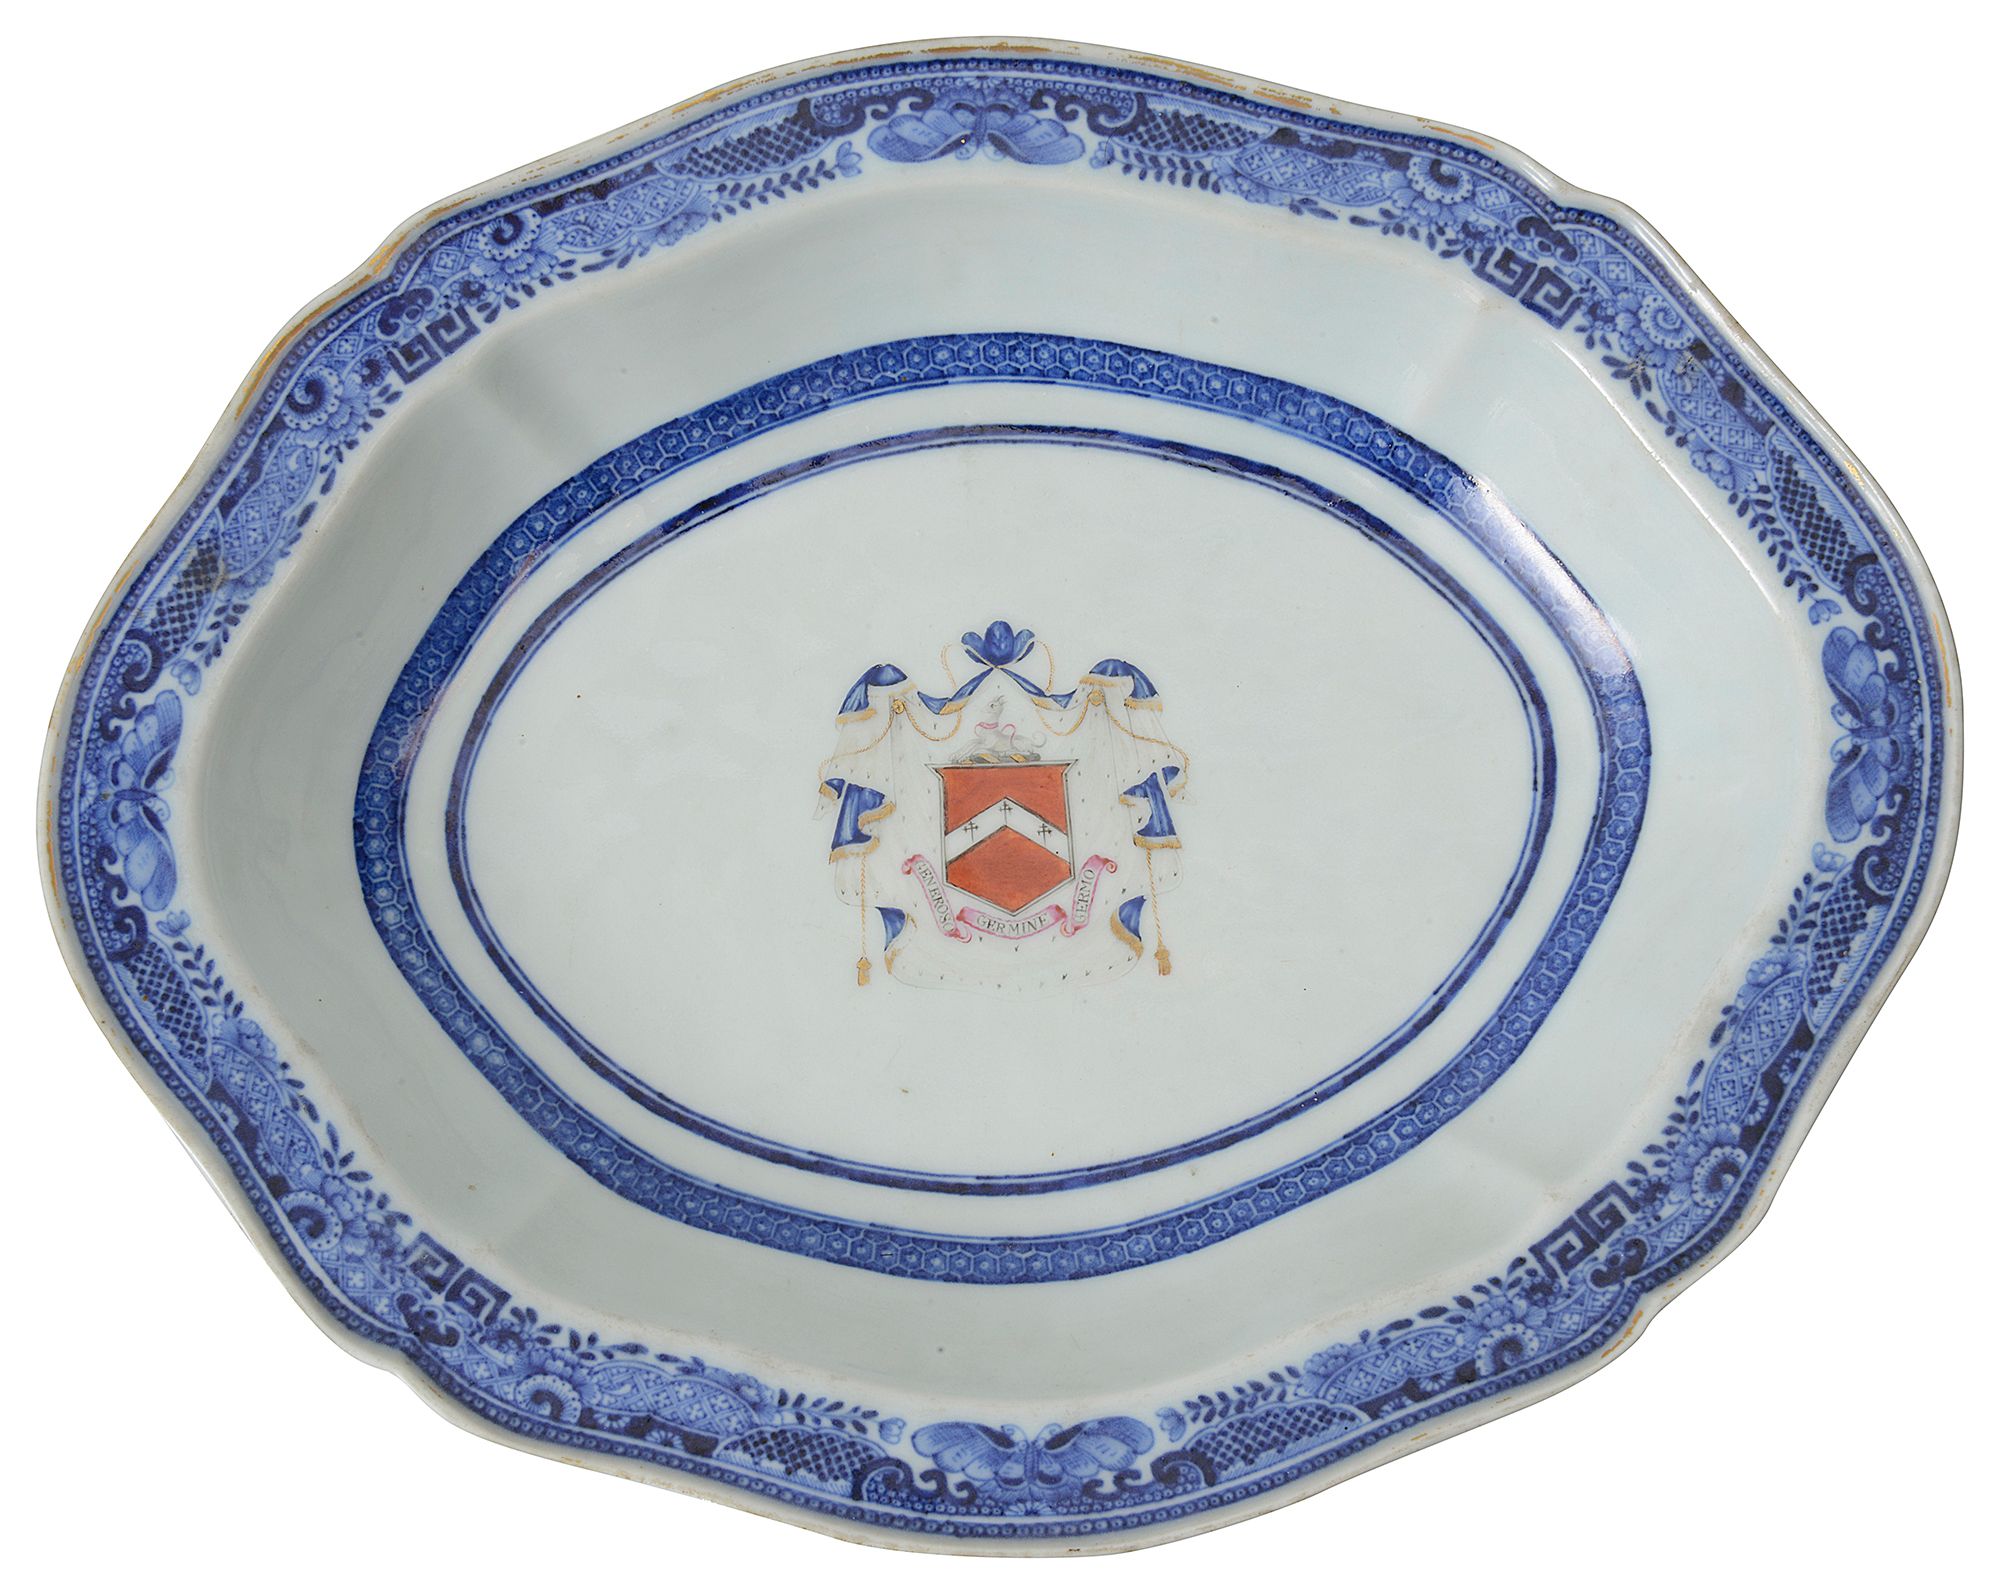 A late 18th century Chinese export blue and white armorial dish